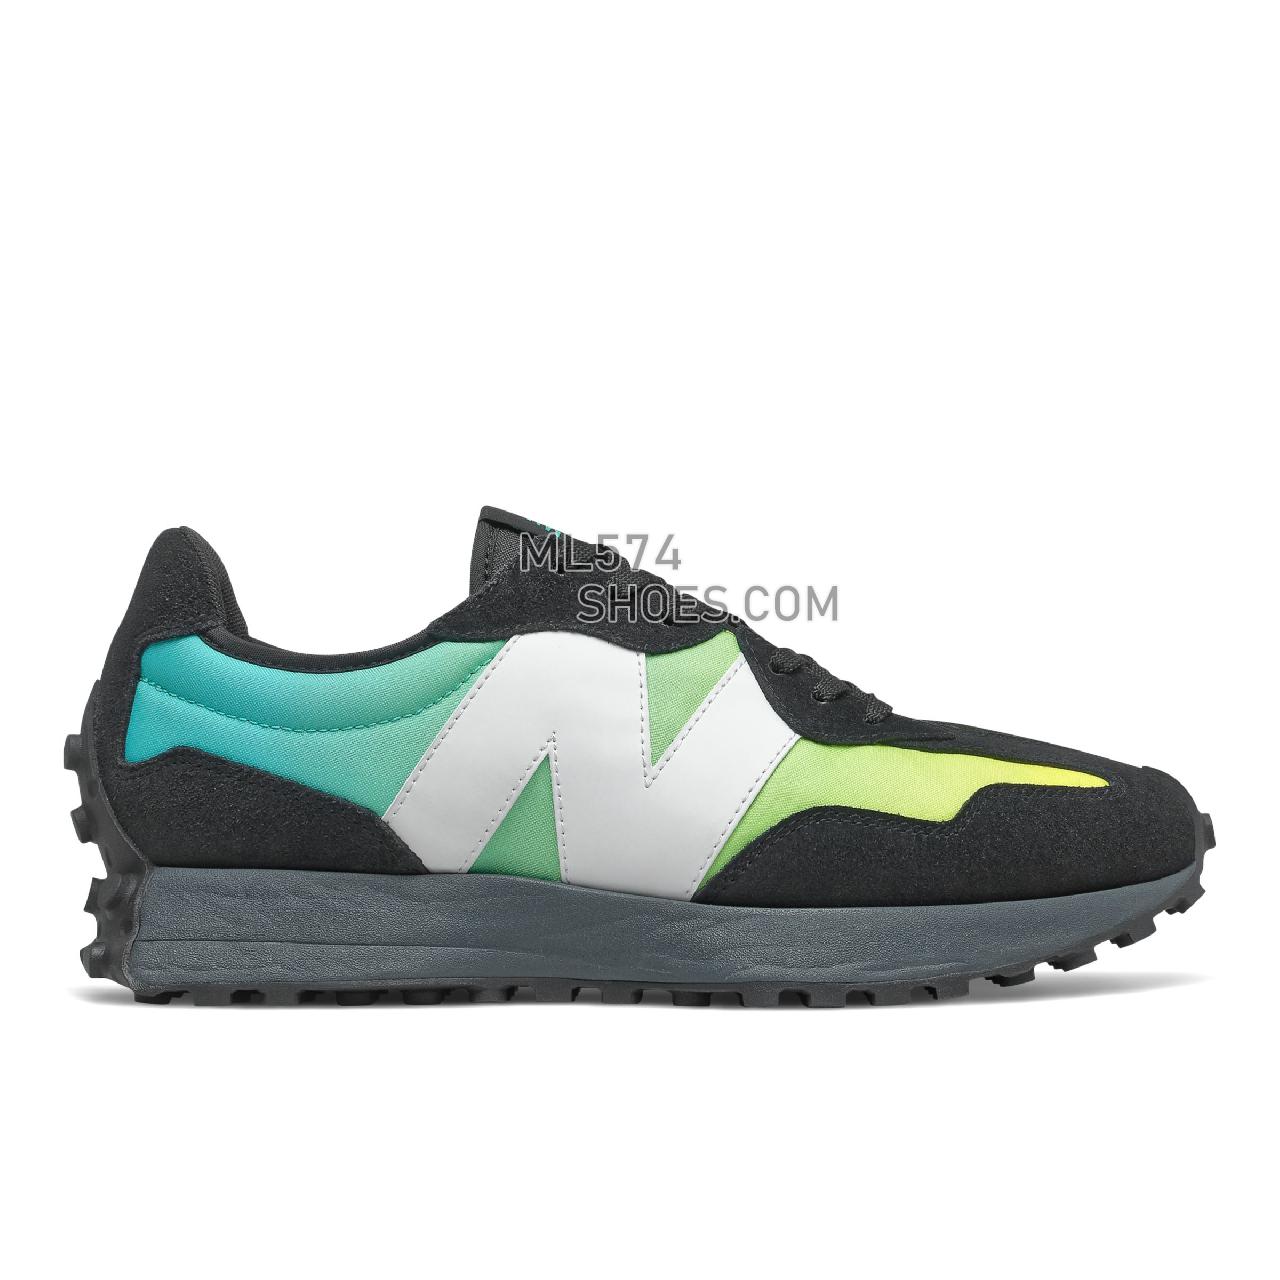 New Balance 327 - Men's Sport Style Sneakers - Summer Jade with Black - MS327SA